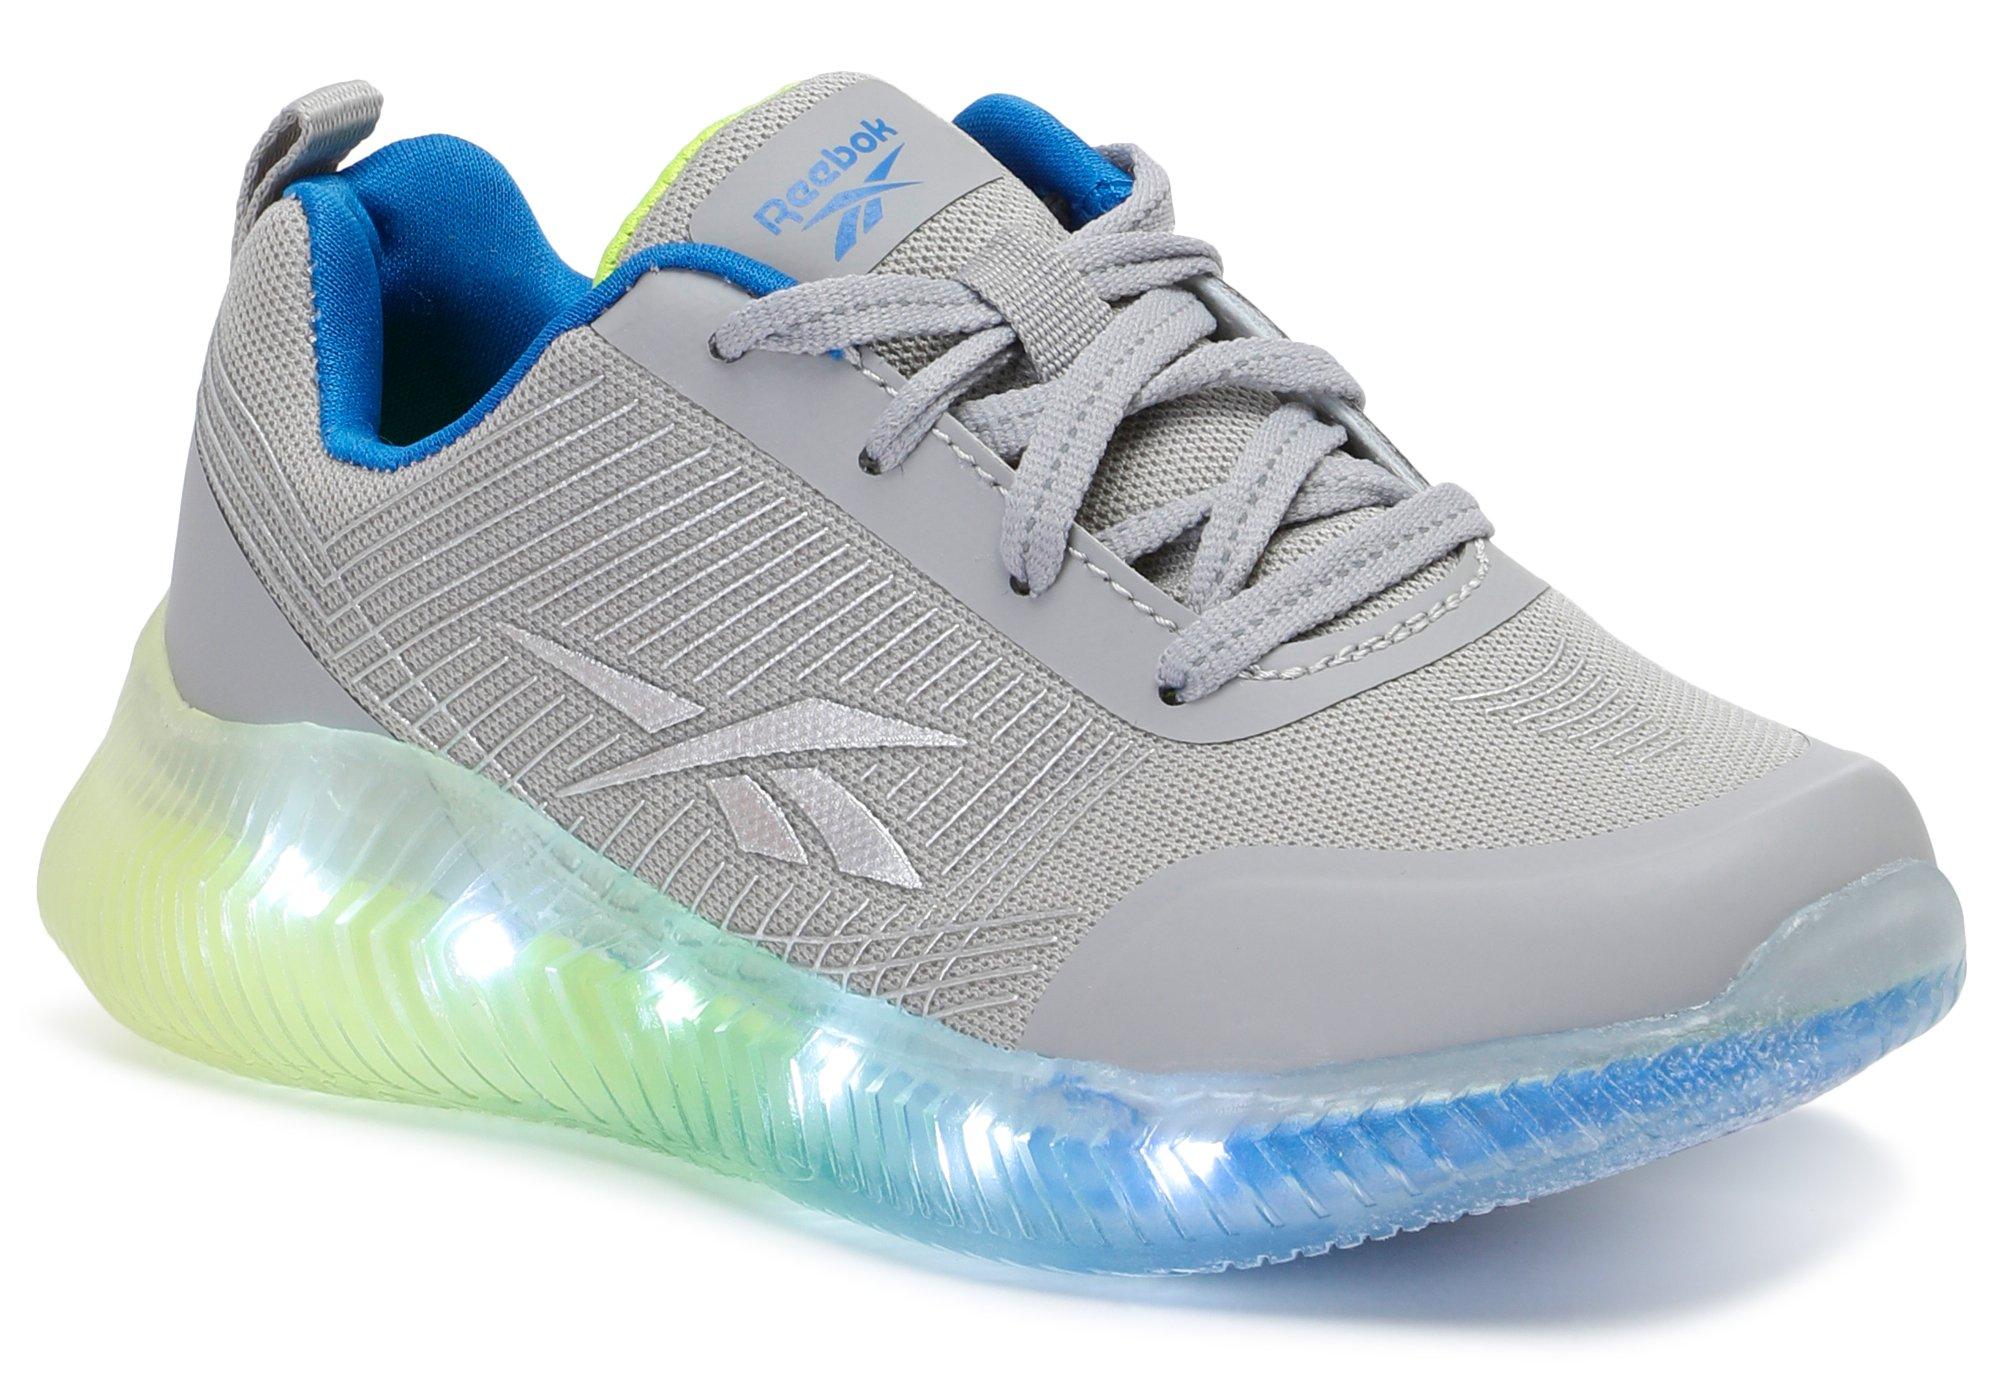 Boys Light Up Sneakers